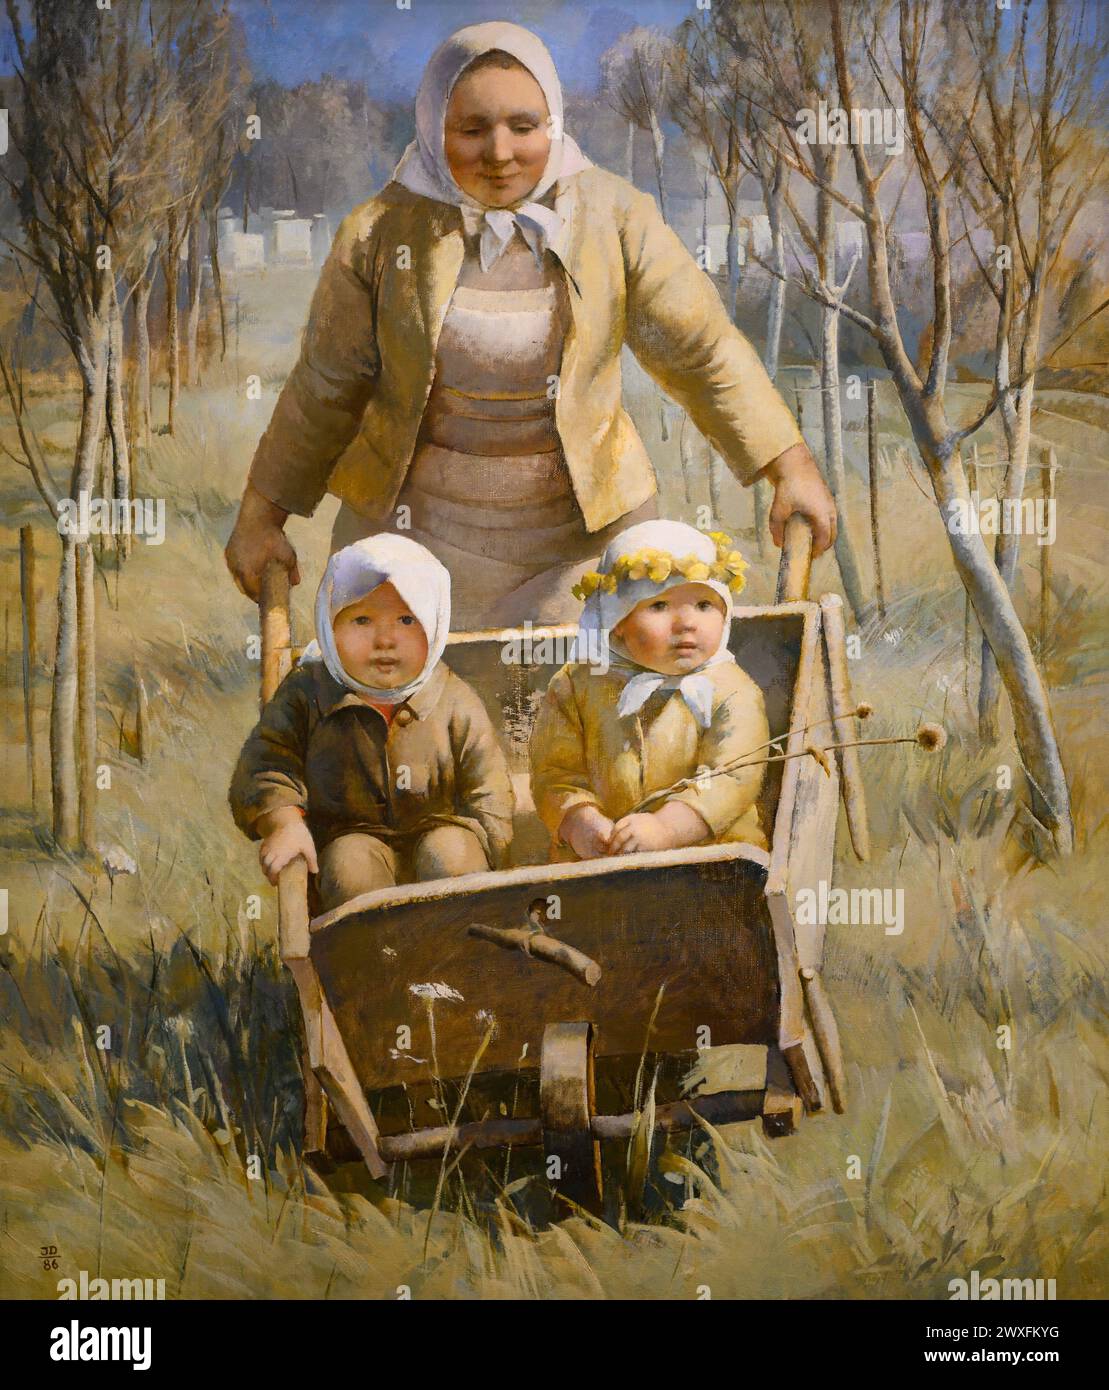 'Lauku Madonna' ['Country Madonna'] (1986). A painting by Inta Dobrāja (1940 – 2020). Daugavpils Local History and Art Museum. Stock Photo